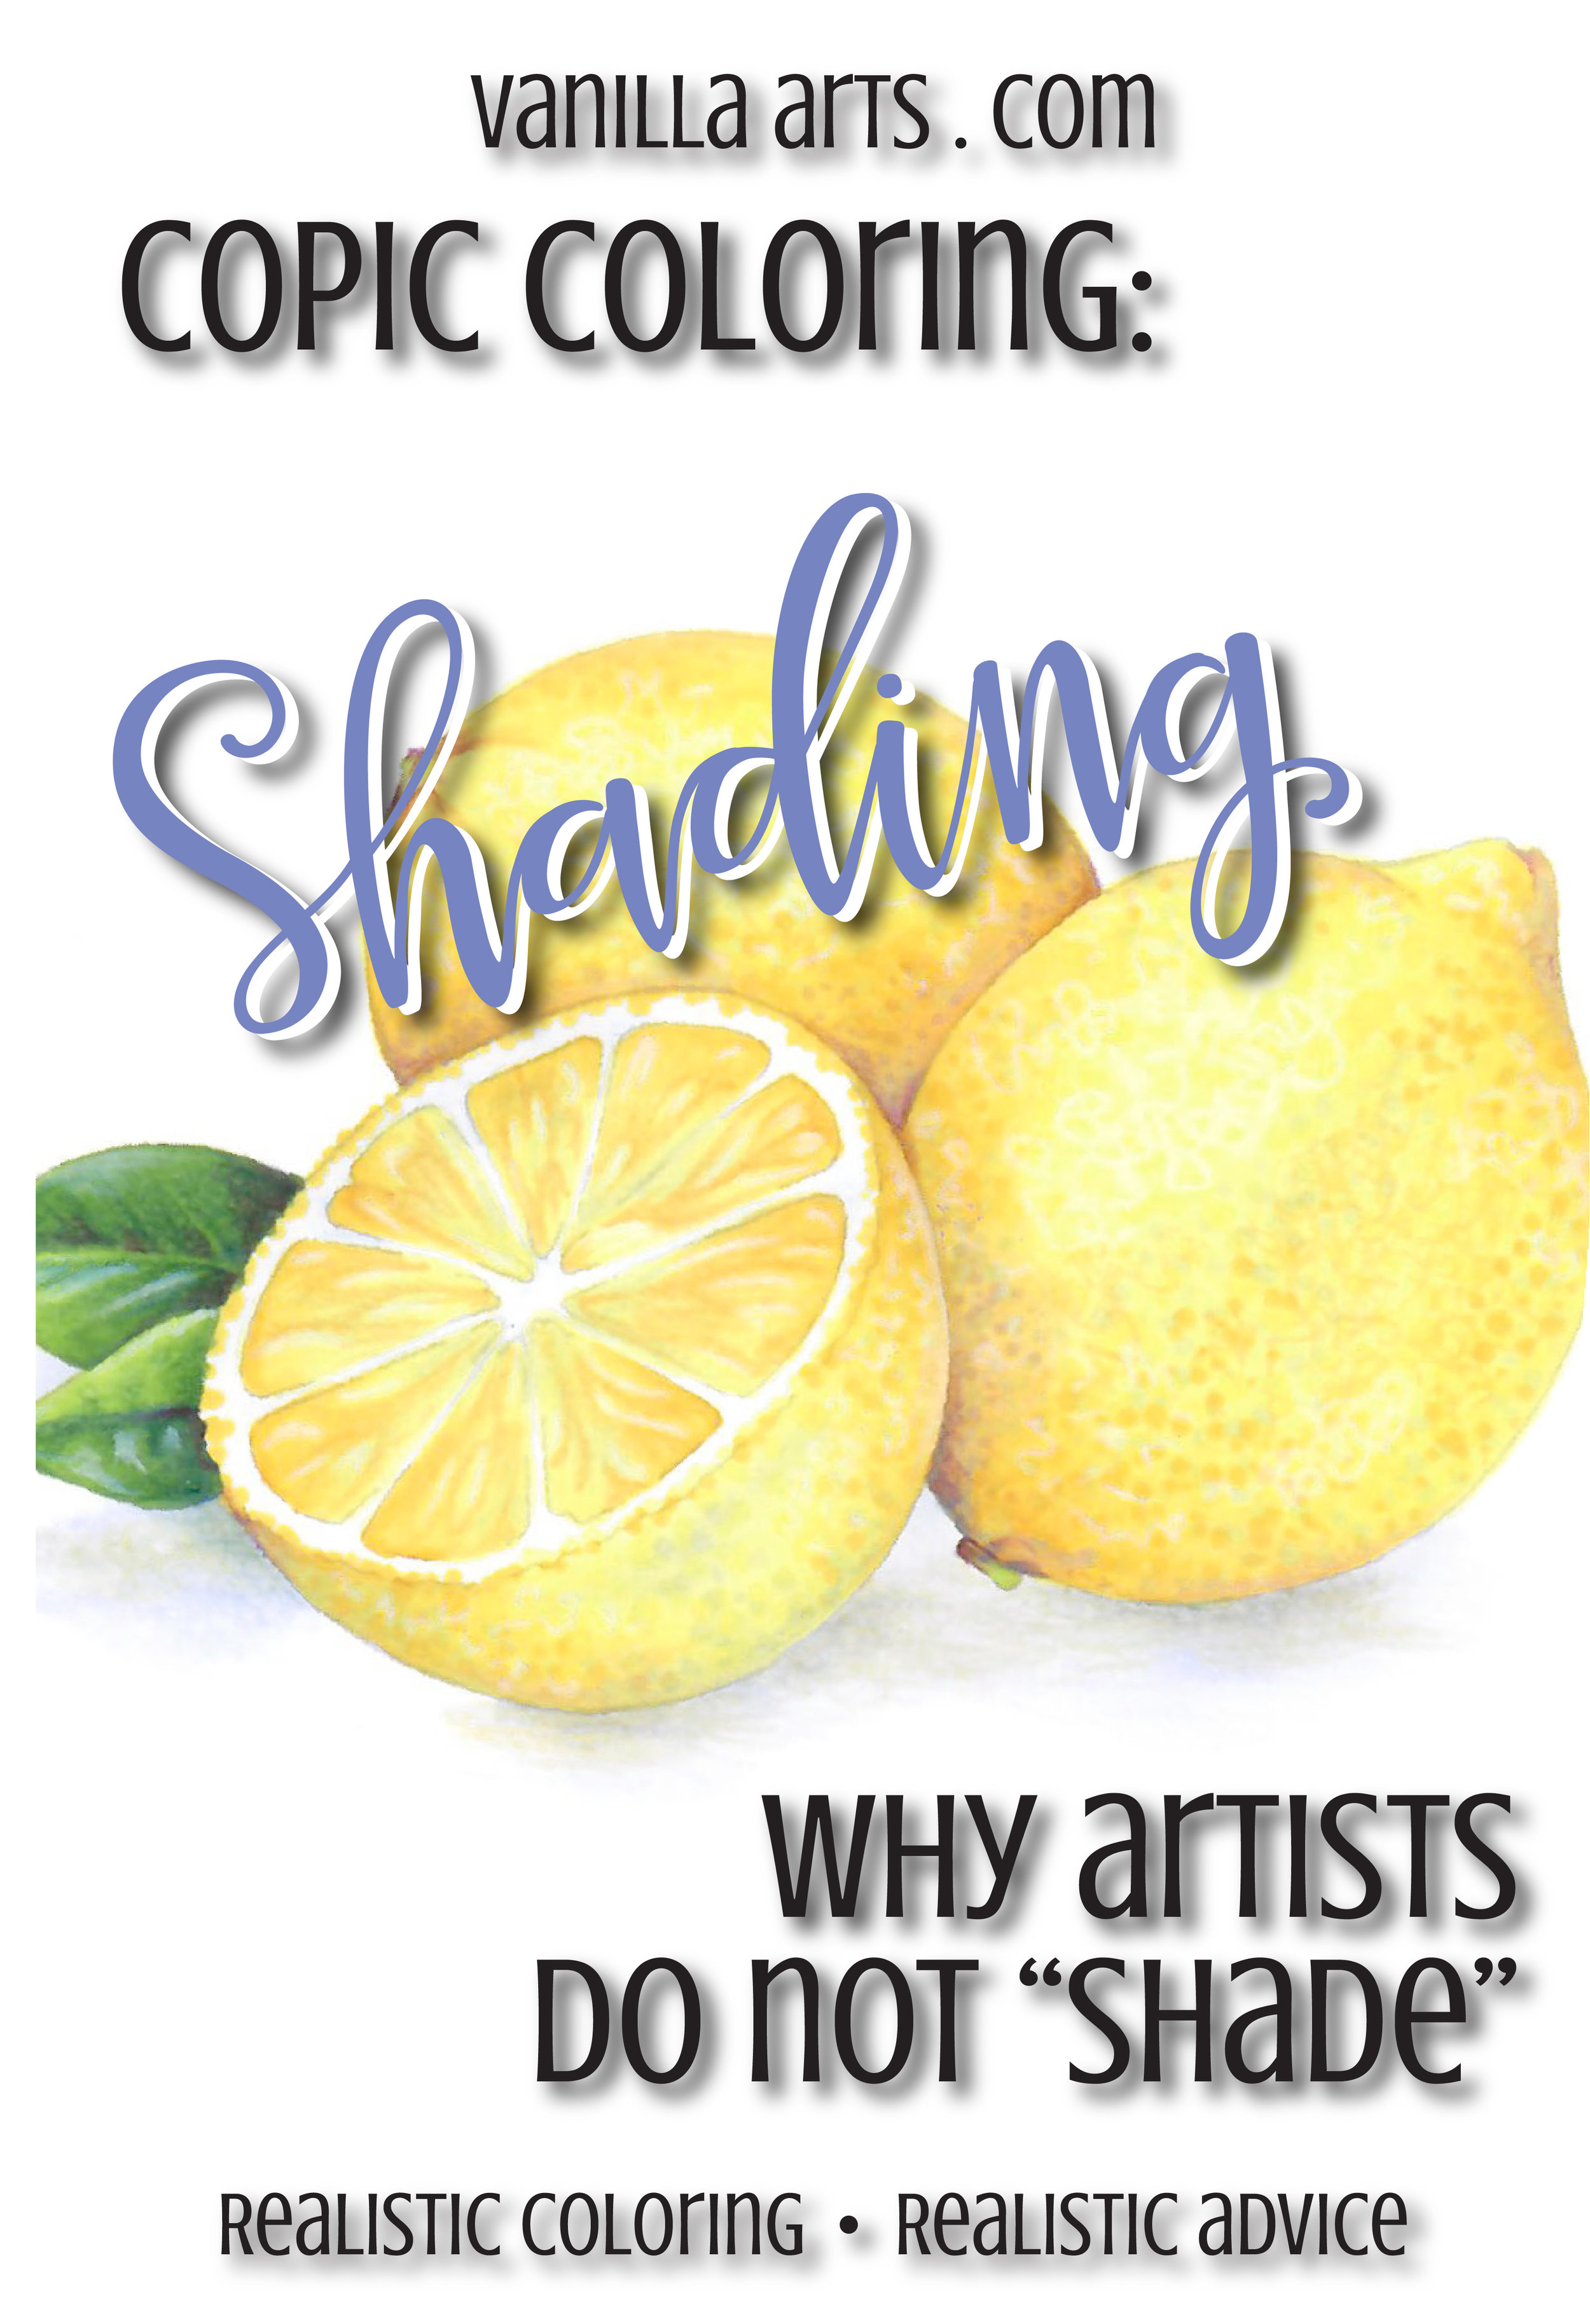 Copic Coloring: Why Artists Do Not Shade (Part 1) (Copy)